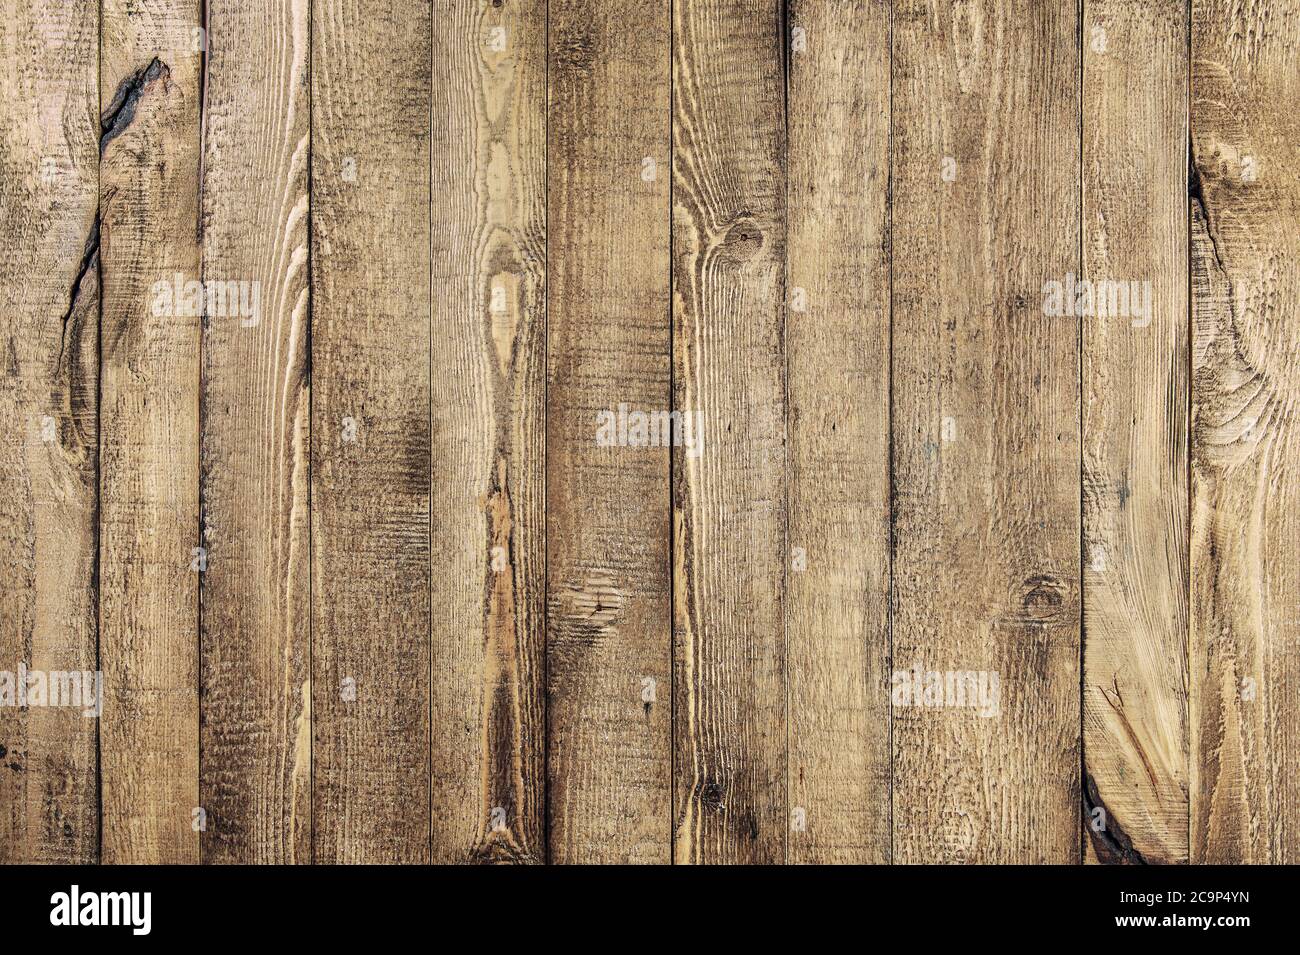 Wooden distressed background. Brown rustic wood plank Stock Photo